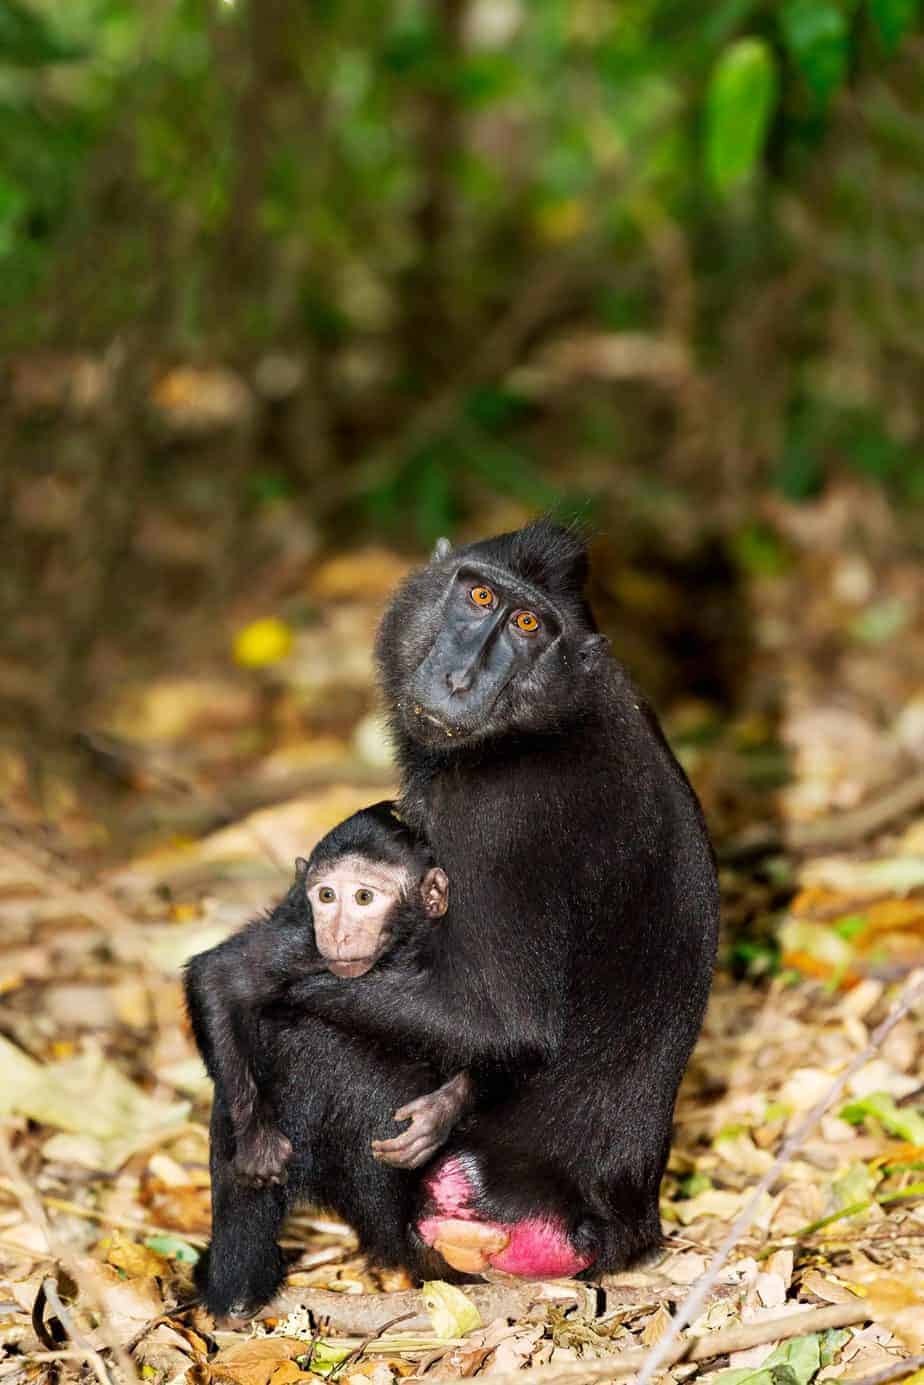 Celebes crested macaque as black monkey, mother with baby, Sulawesi, Indonesia